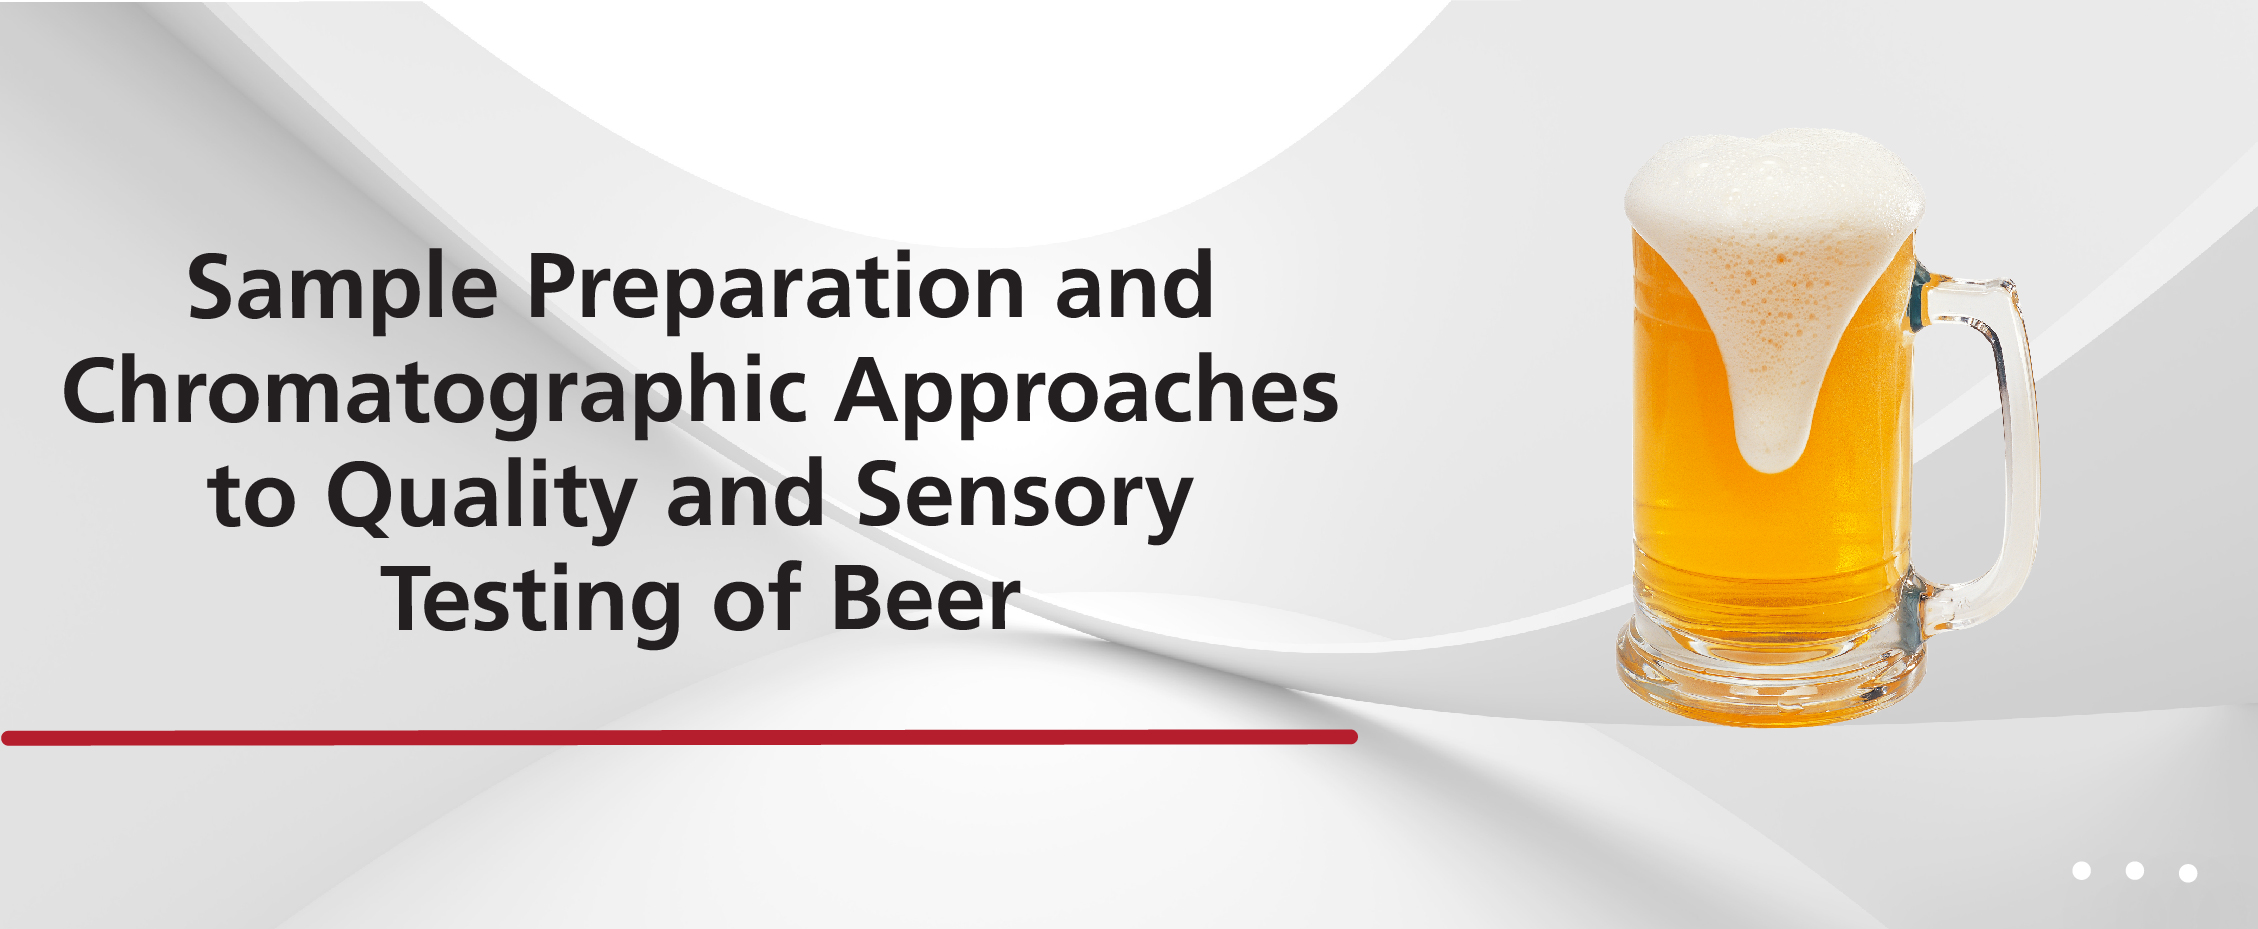 Sample Preparation and Chromatographic Approaches to Quality and Sensory Testing of Beer